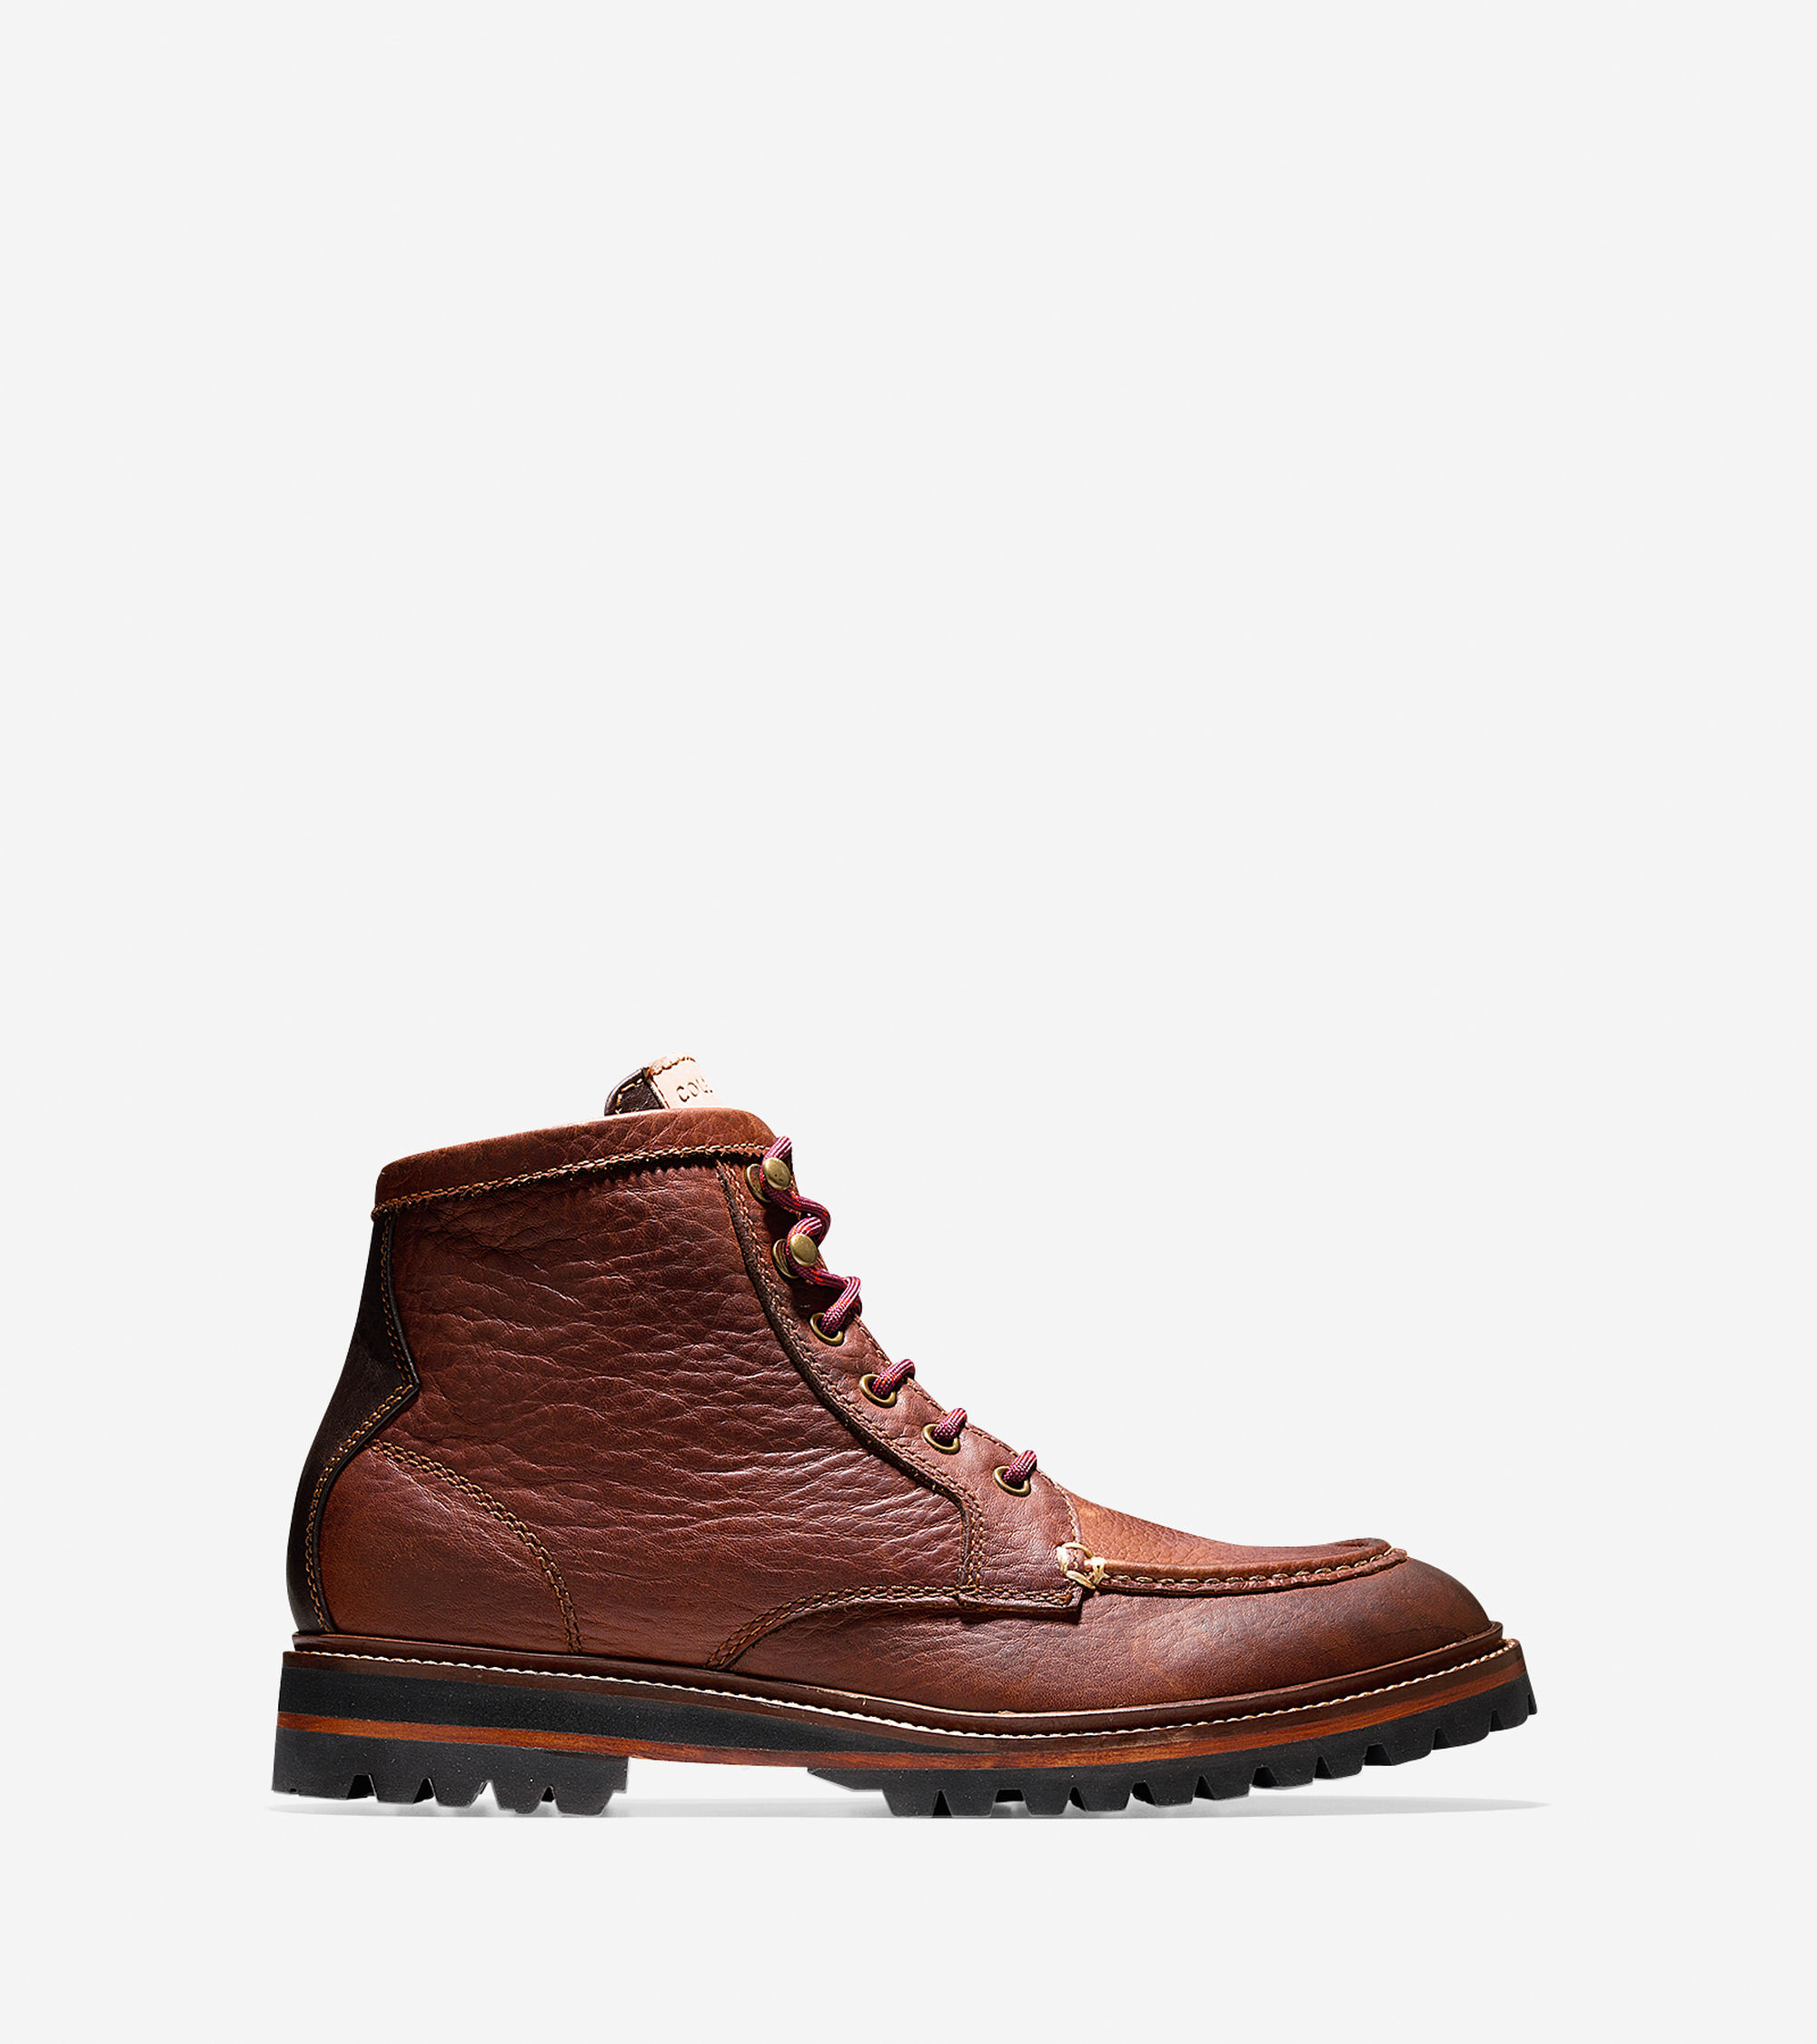 Lyst - Cole Haan Judson Water Resistant Boot in Brown for Men